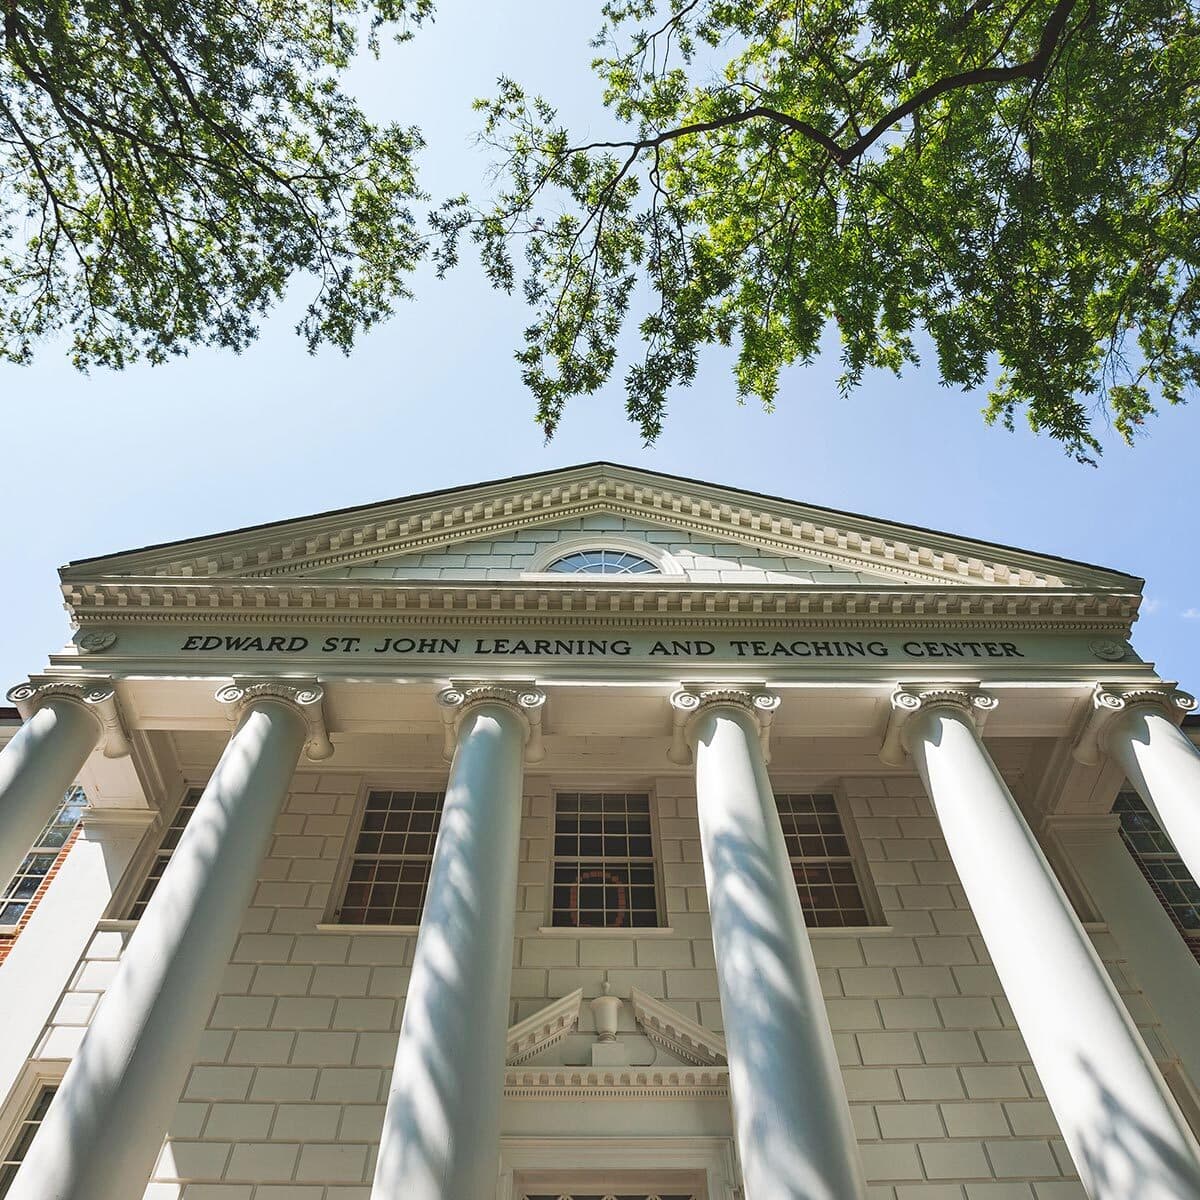 Looking up to the clean, light and grand entrance of the Edward St. John Learning and Teaching Center flanked by smooth neo classical pillars.